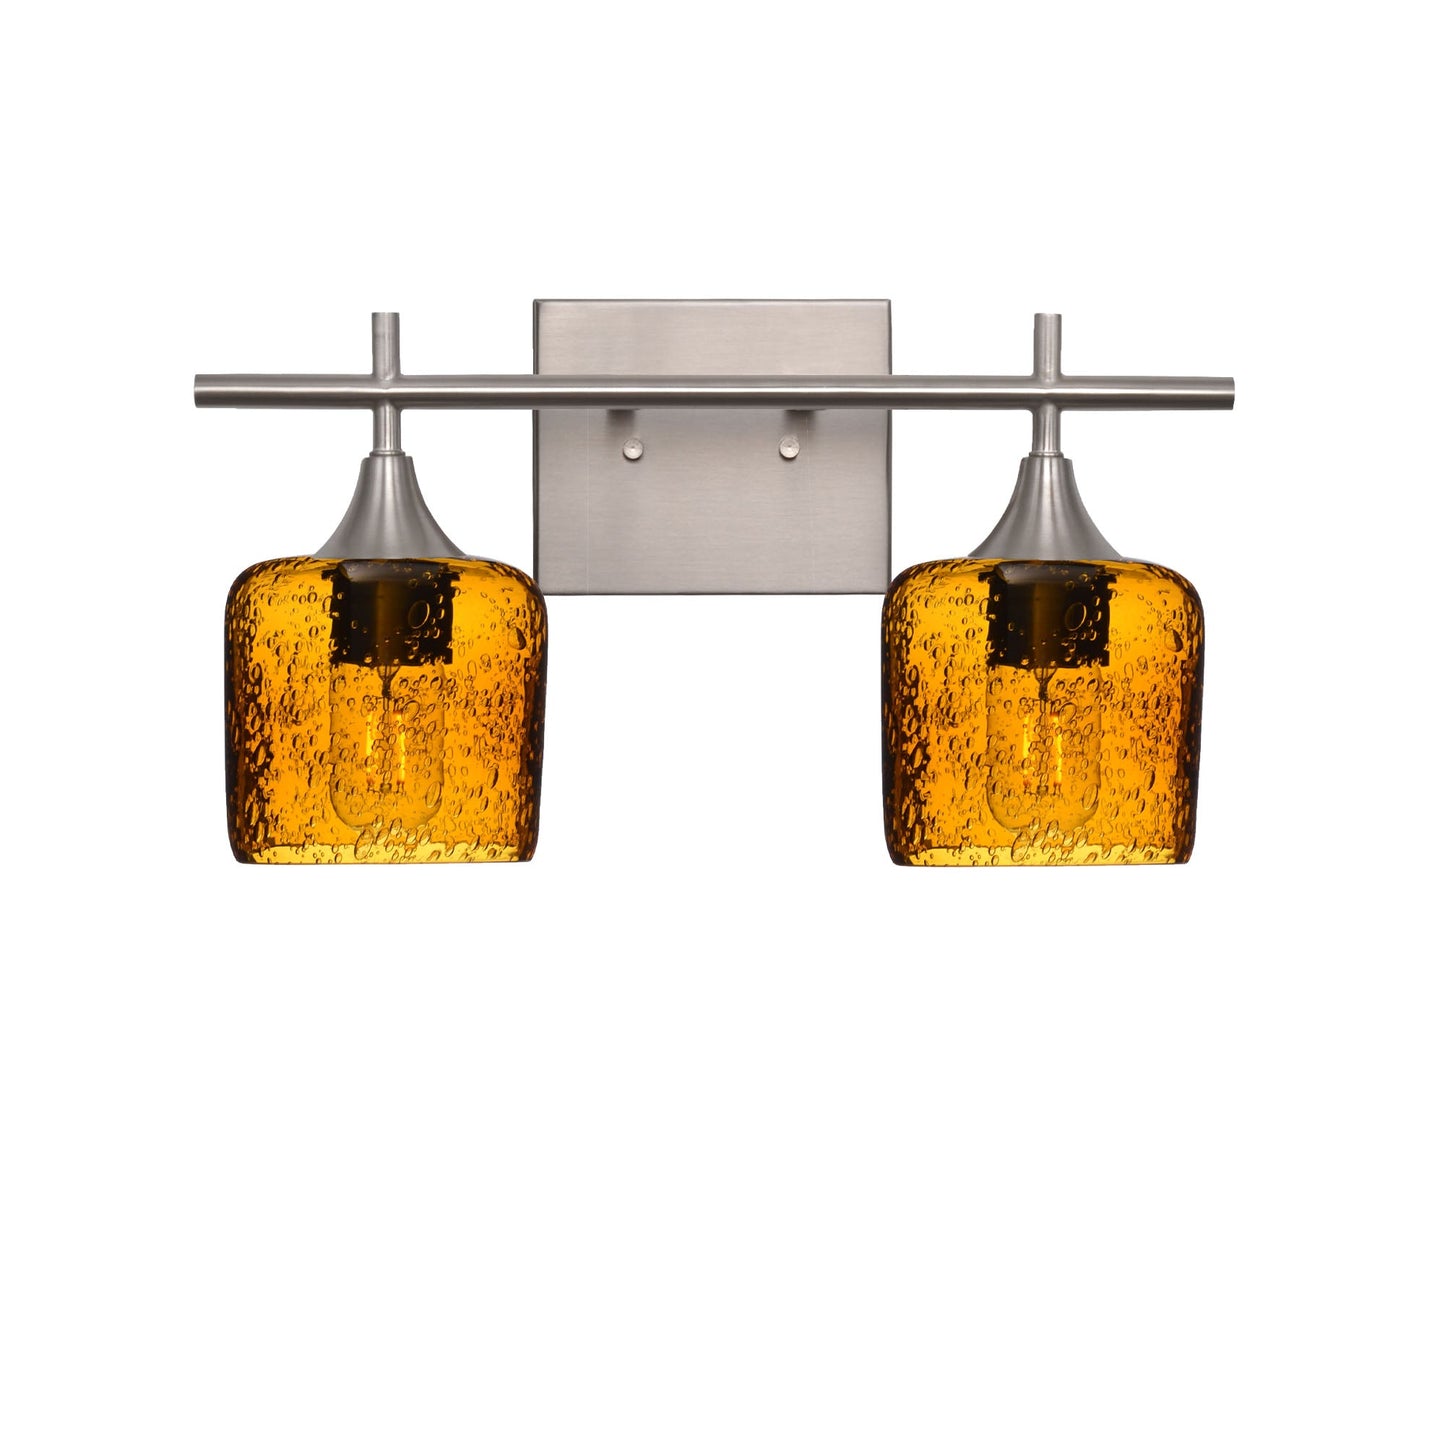 601 Lunar: 2 Light Wall Vanity-Glass-Bicycle Glass Co - Hotshop-Golden Amber-Brushed Nickel-Bicycle Glass Co